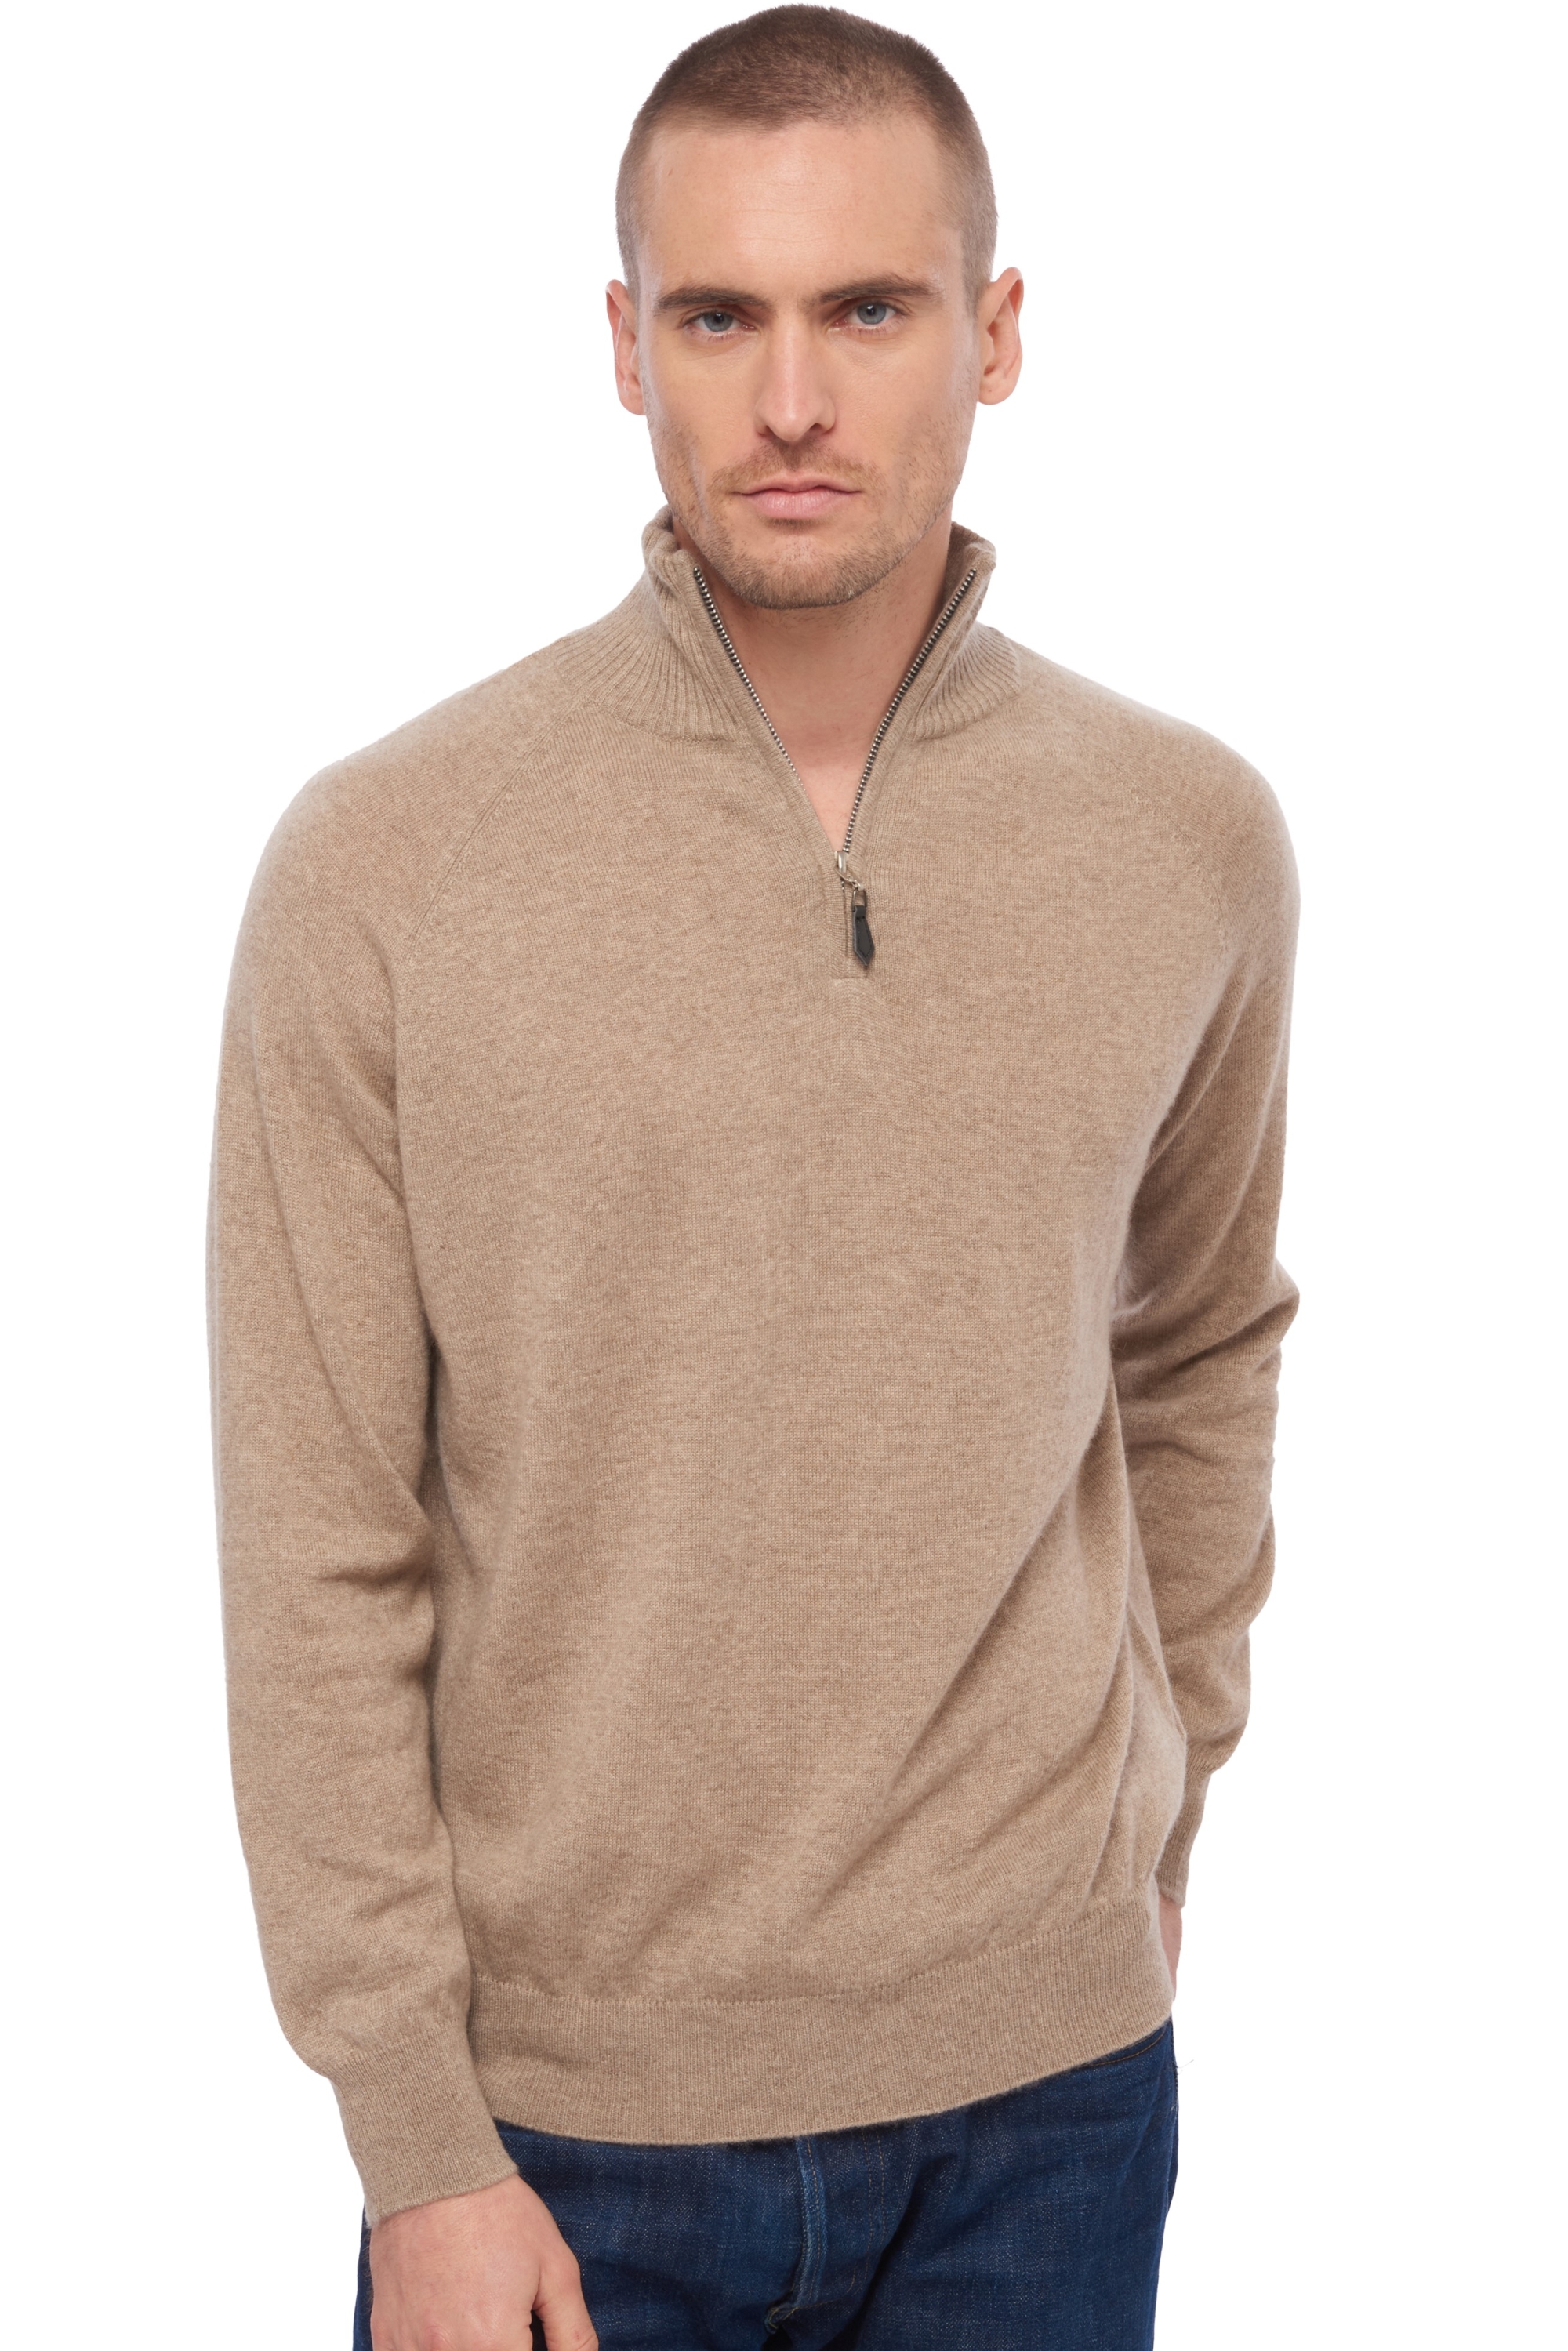 Cashmere men polo style sweaters natural vez natural brown 3xl